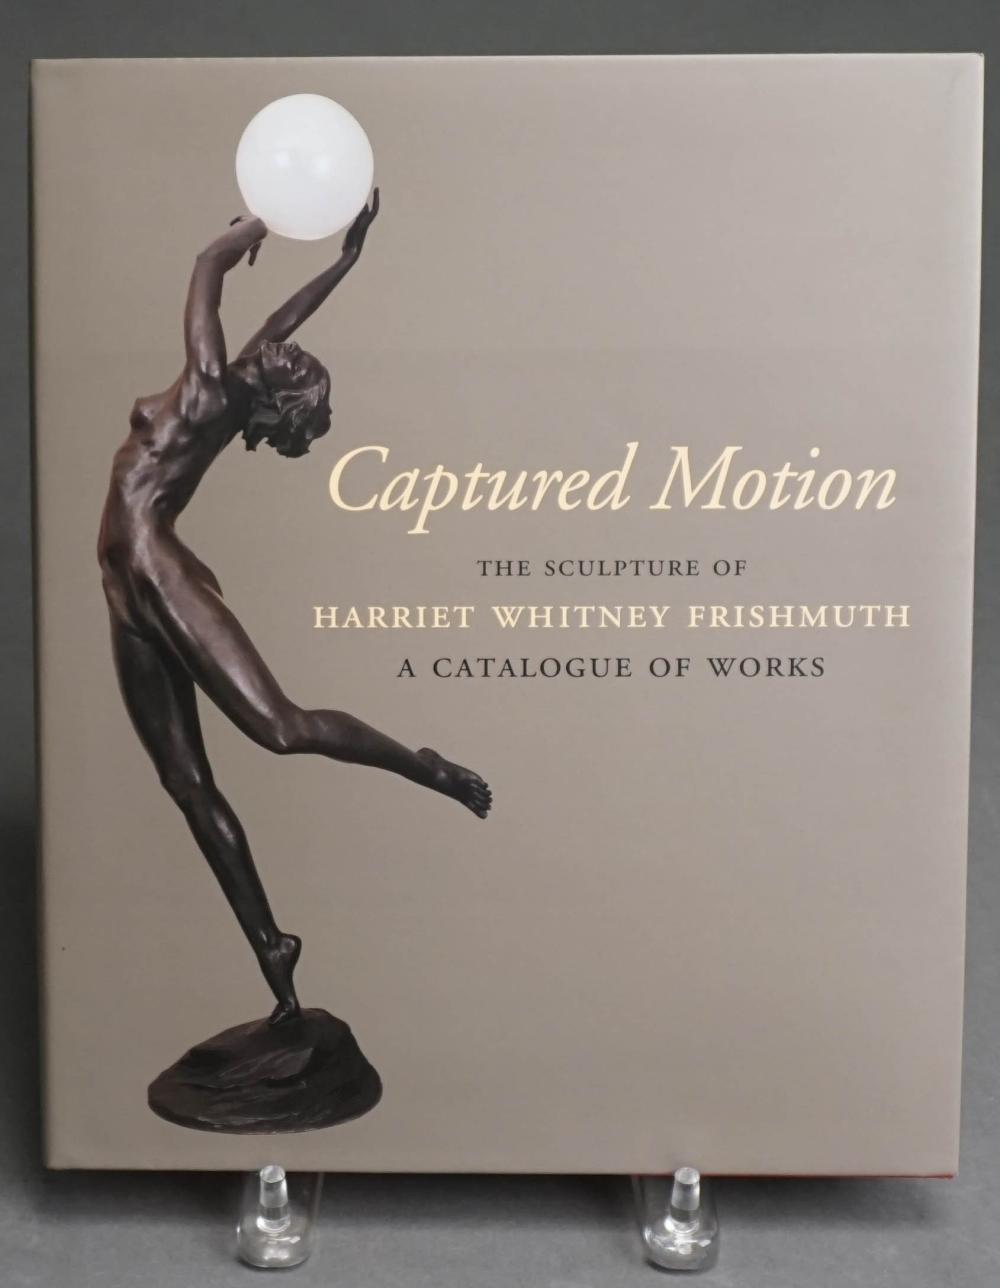 CAPTURED MOTION THE SCULPTURE OF